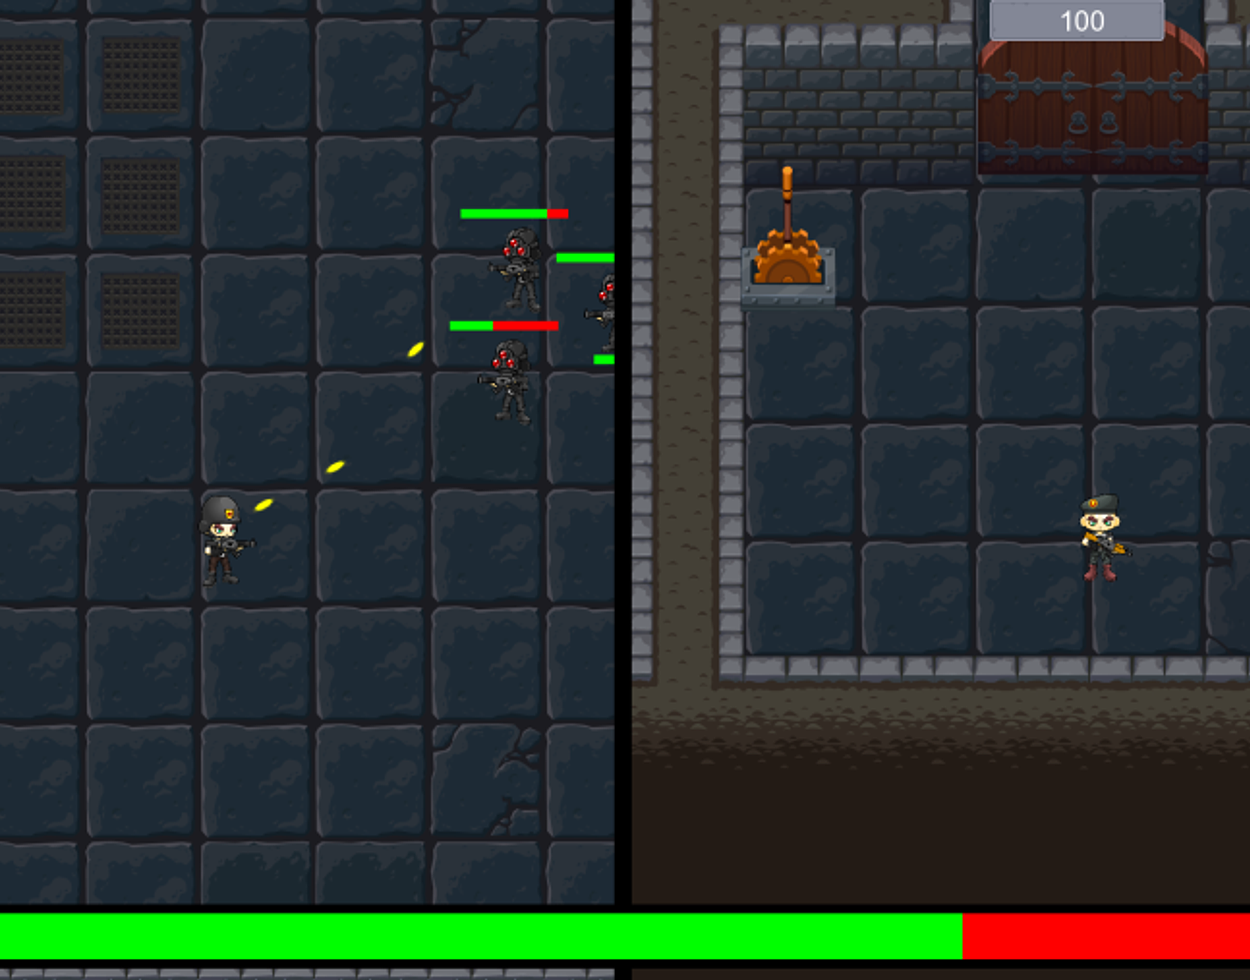 Enemies attacking the Player that has to survive the Onslaught.